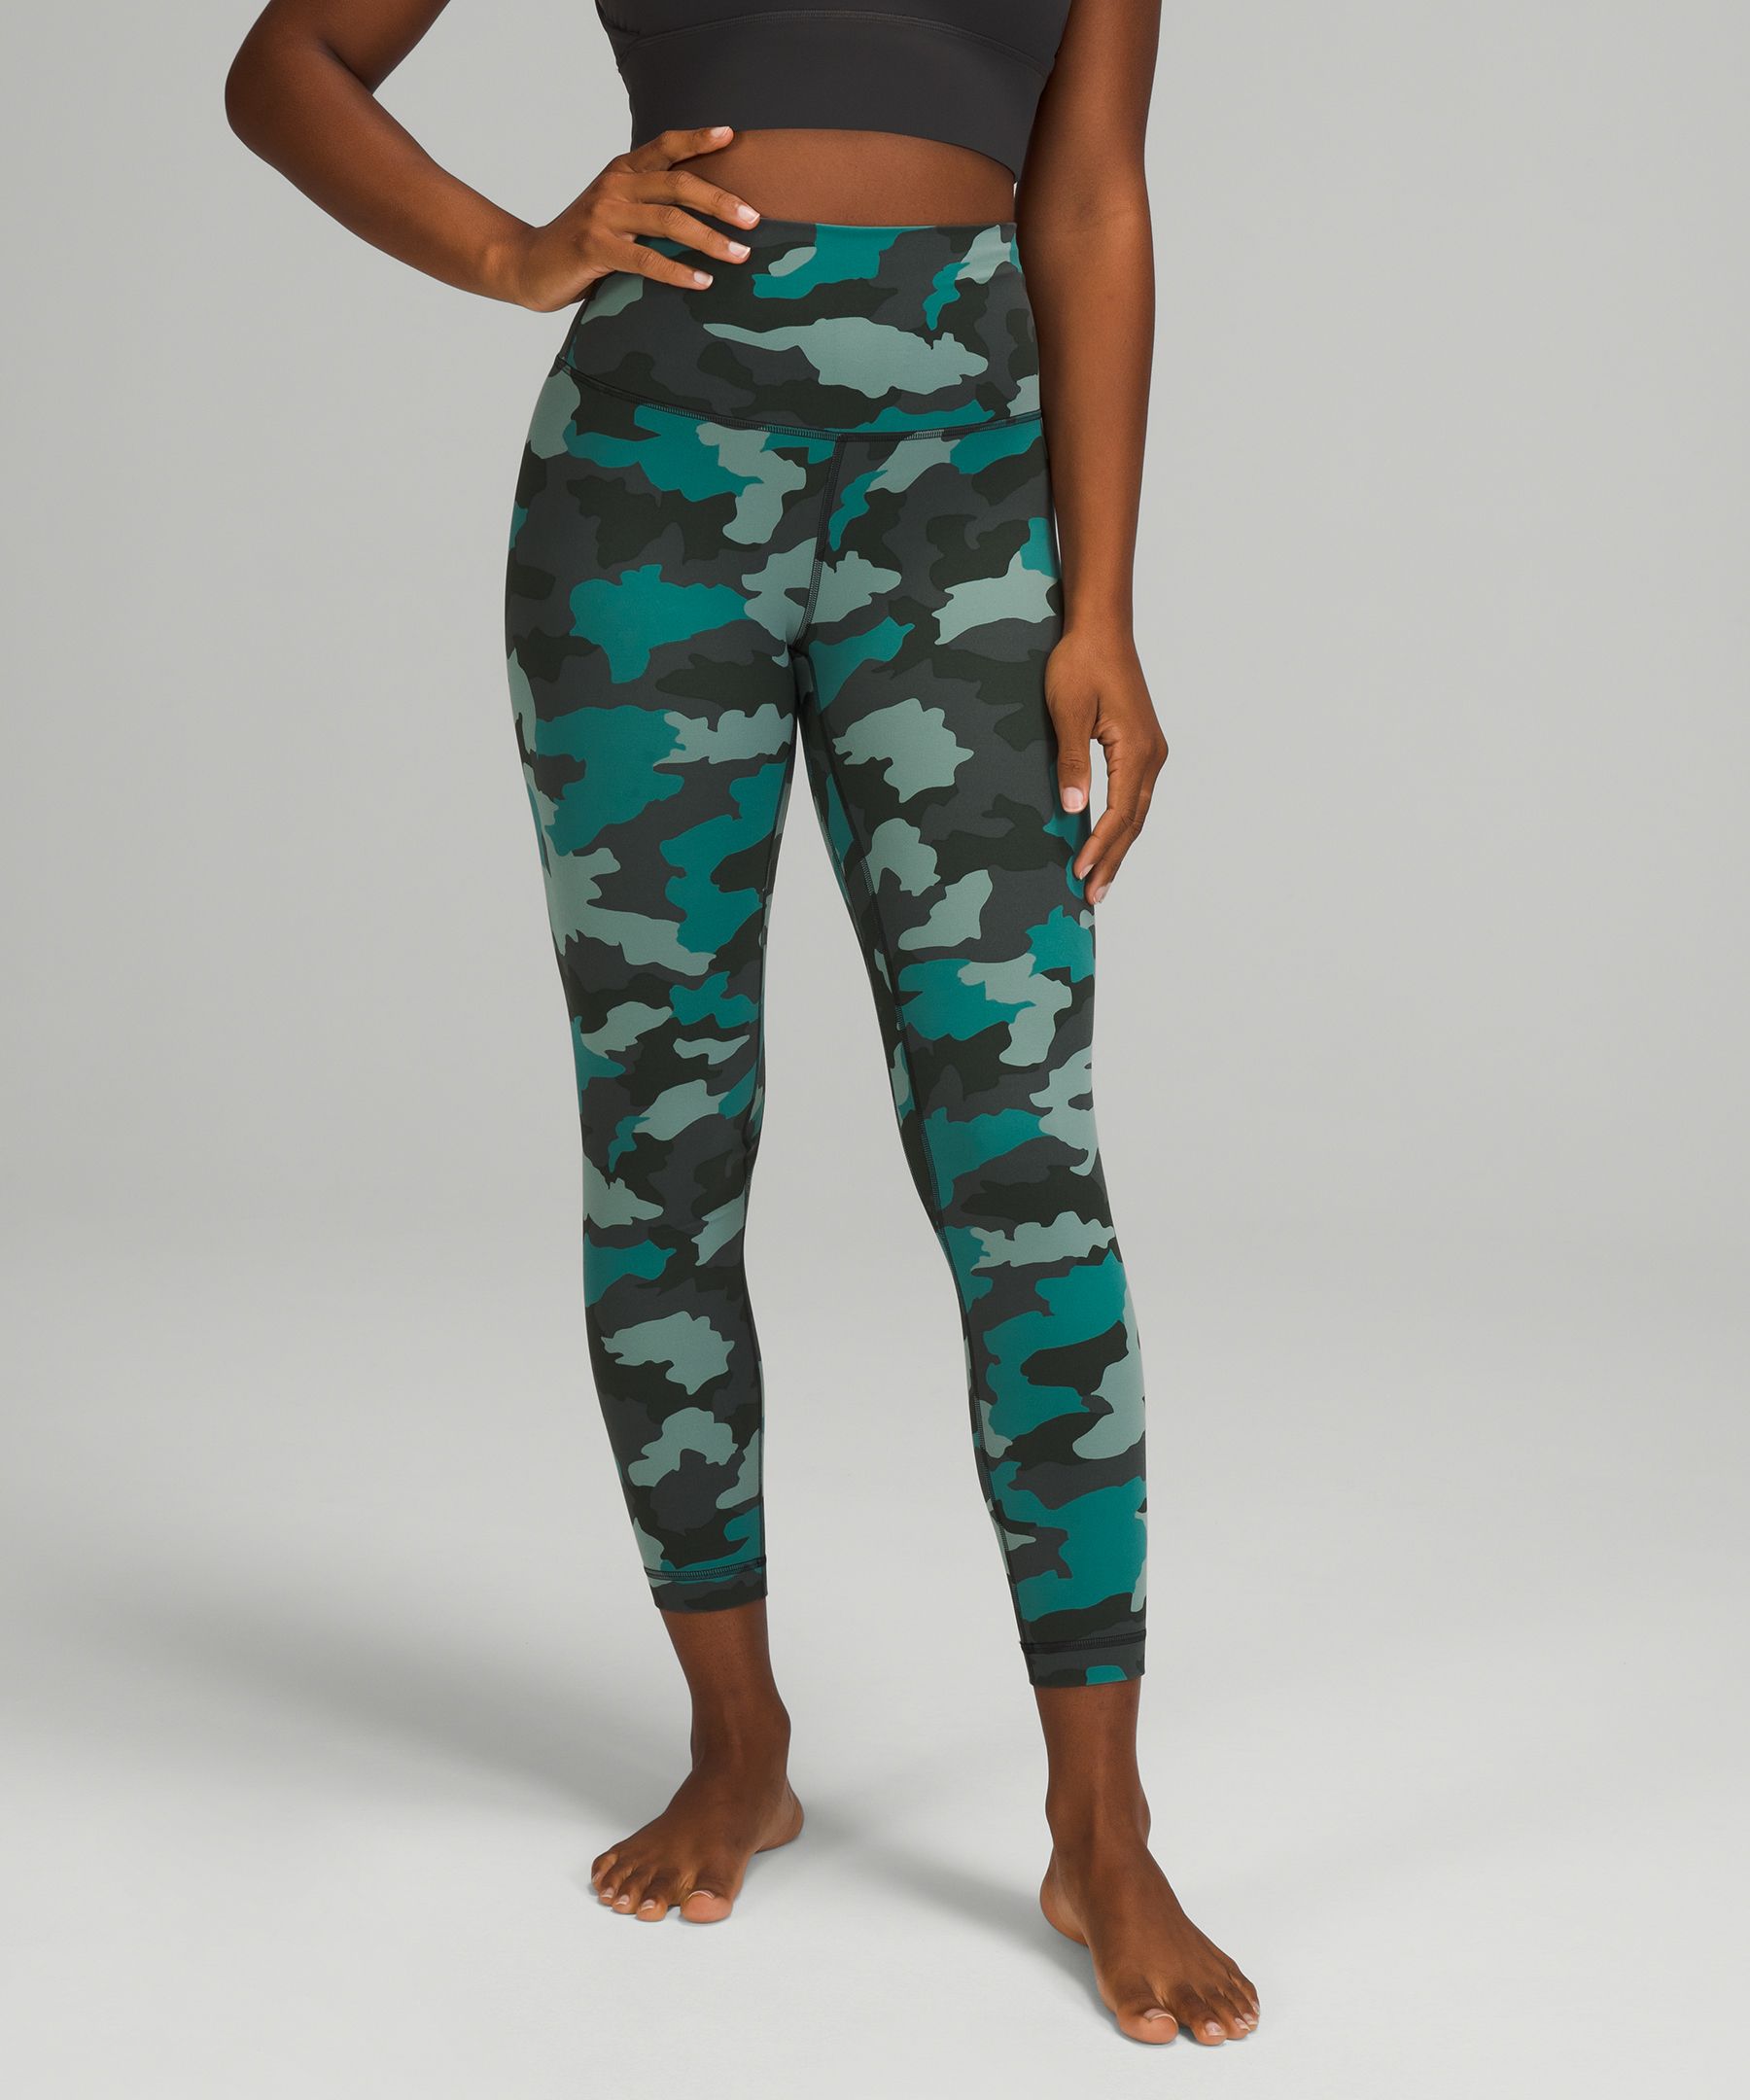 Lululemon Align™ High-rise Pants 25" In Heritage 365 Camo Tidewater Teal